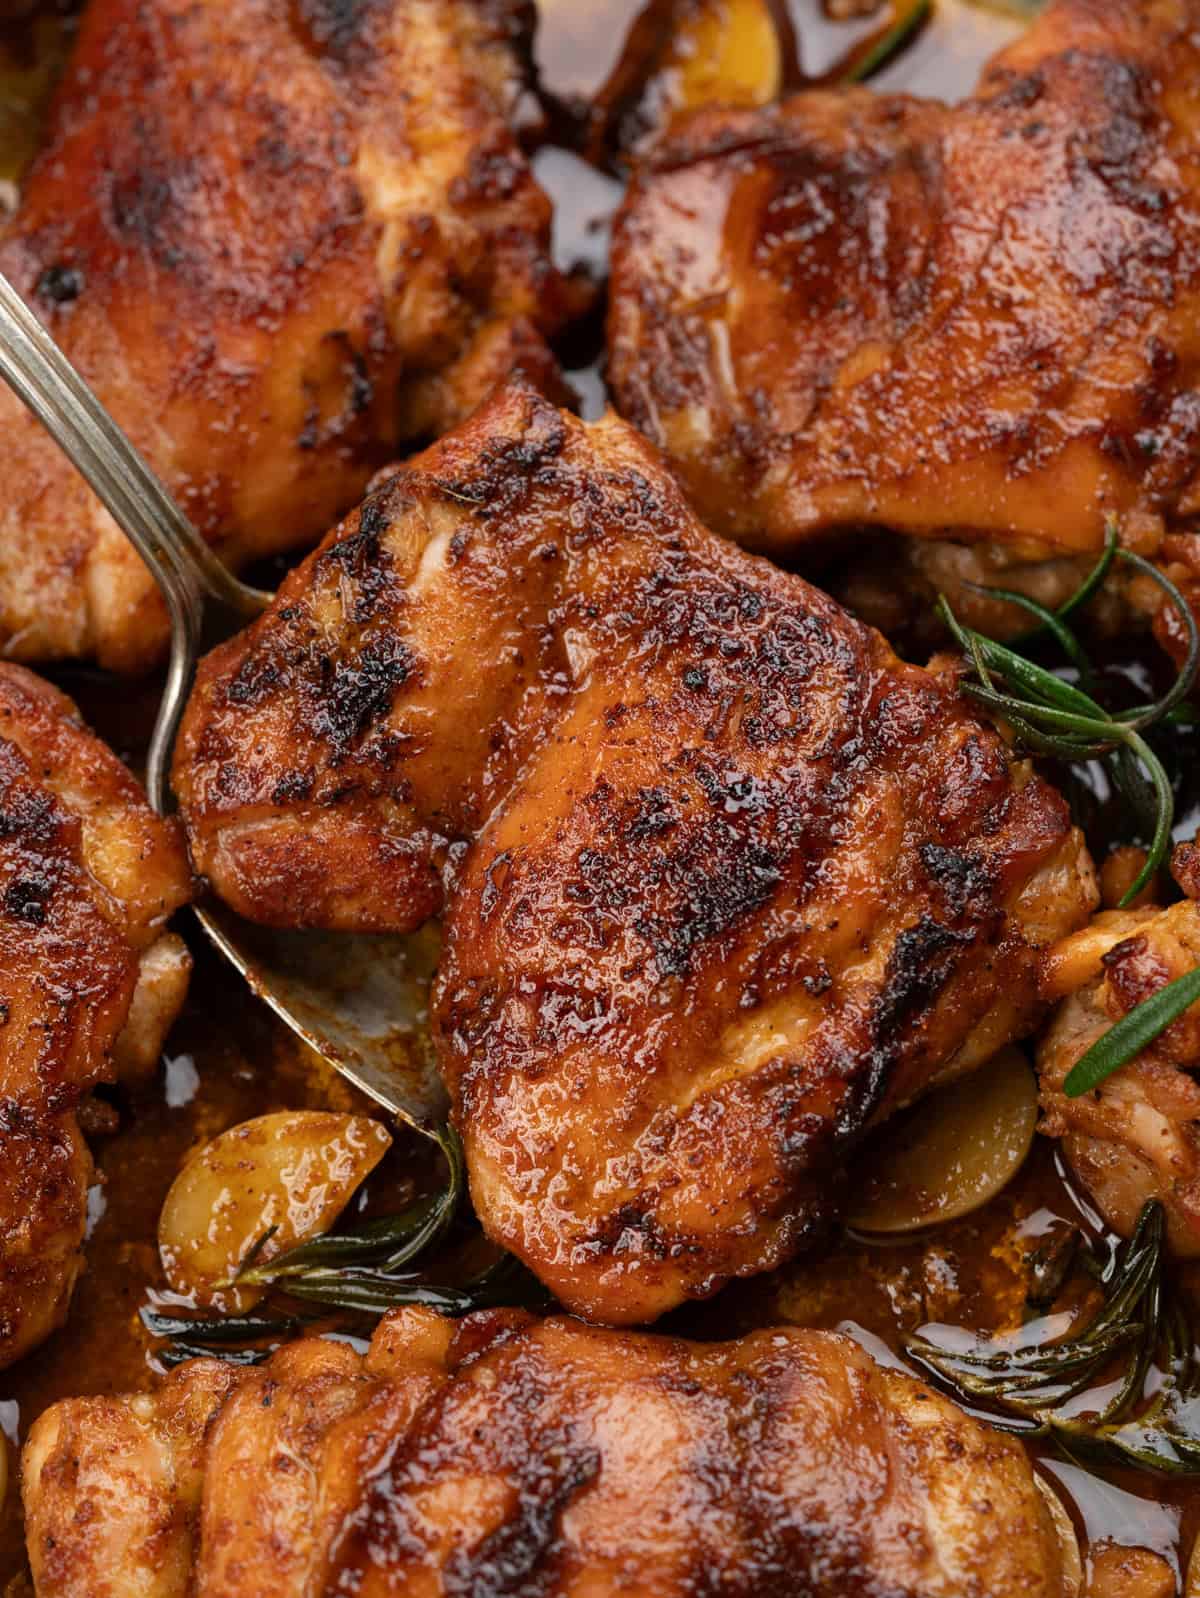 Crispy chicken thighs with glazed with sweet and spicy sauce. 